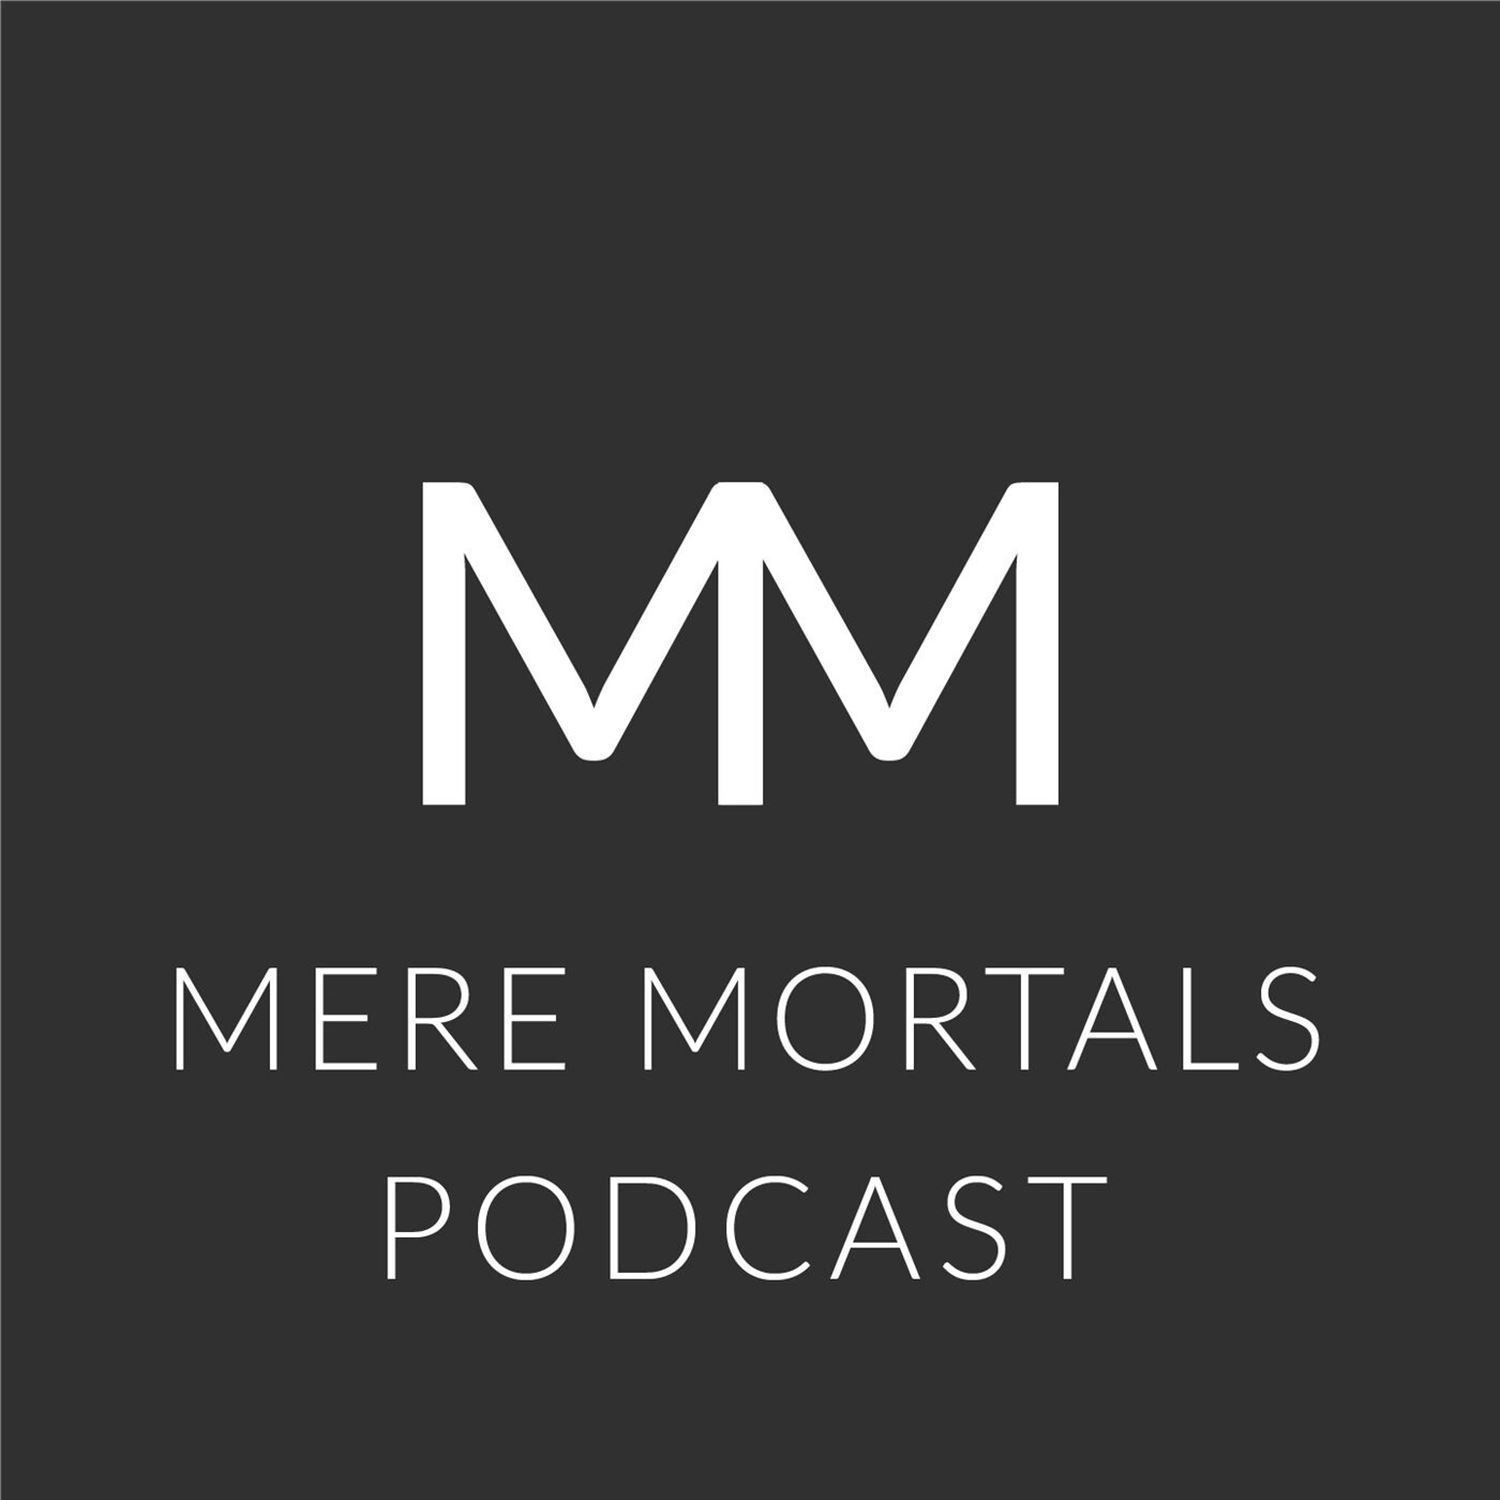 Stress, Fear, Disorders & Health (Mere Mortals Episode #97 - Anxiety)